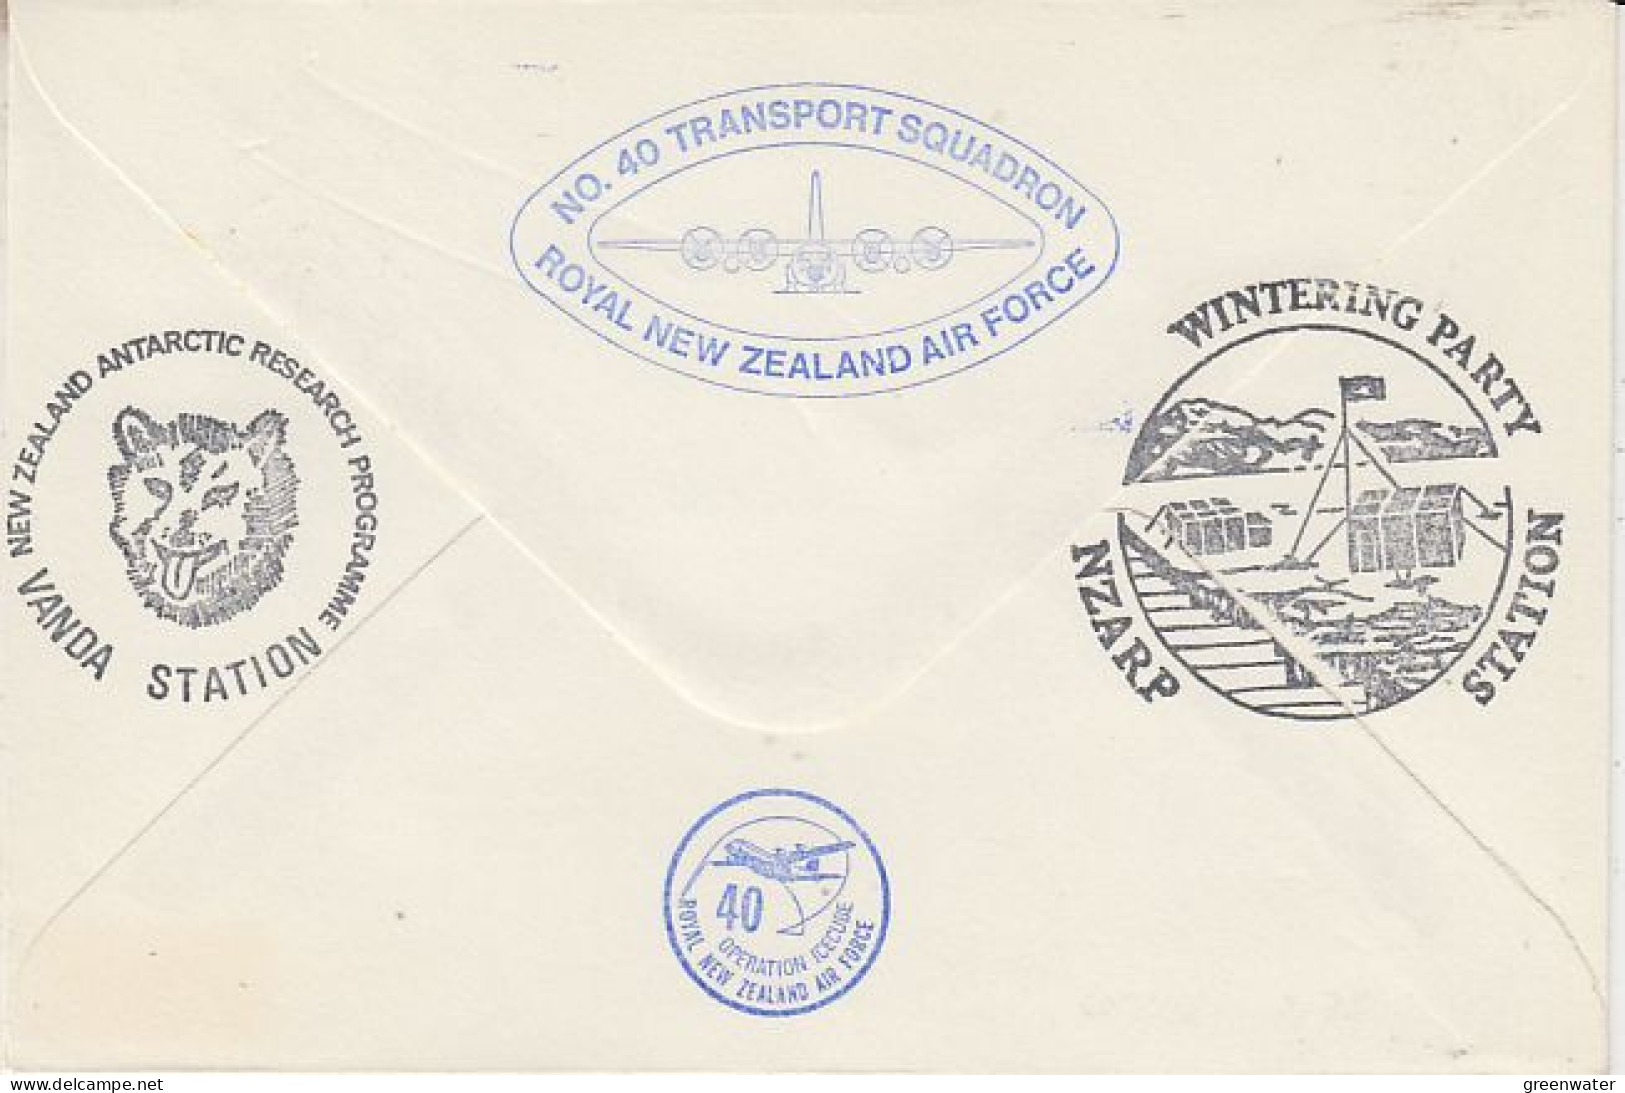 Ross Dependency 1974 Operation Icecube 10 Signature  Ca Scott Base 5 DEC 1974 (RT188) - Covers & Documents